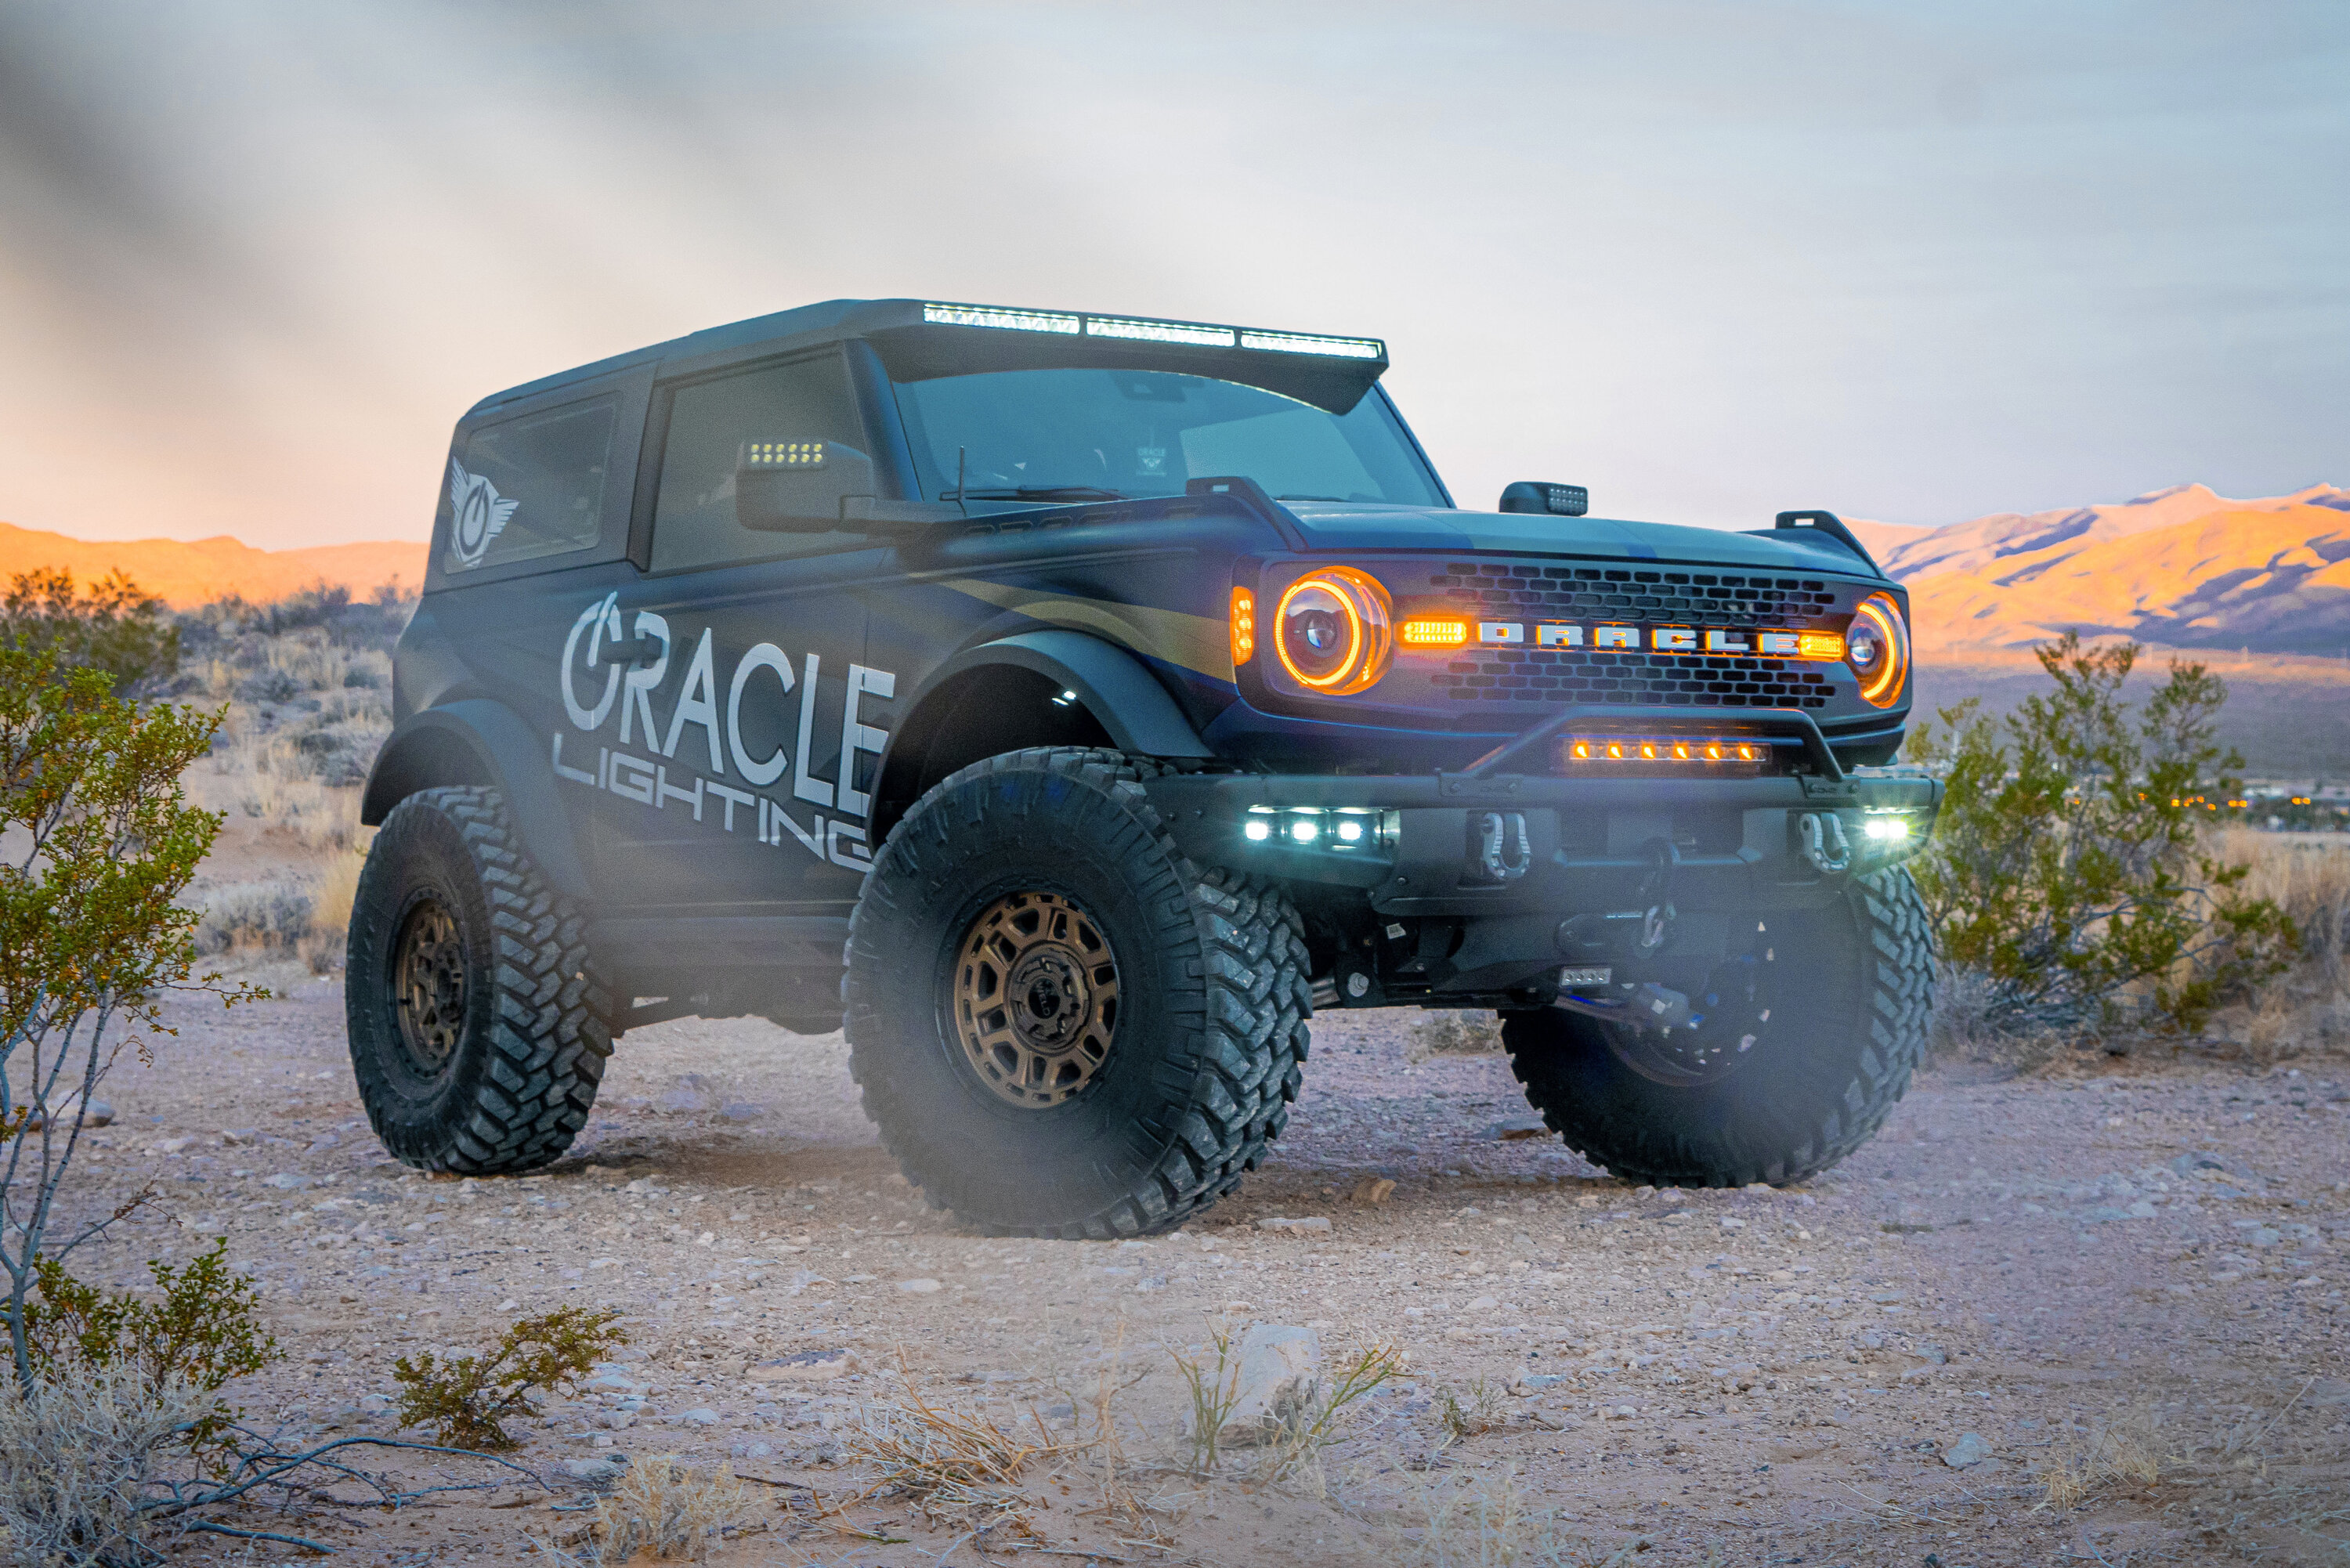 Ford Bronco Integrated Roof/Windshield LED Light Bar System for 2021+ Ford Bronco Oracle Lighting SEMA EVENT PHOTOS-154